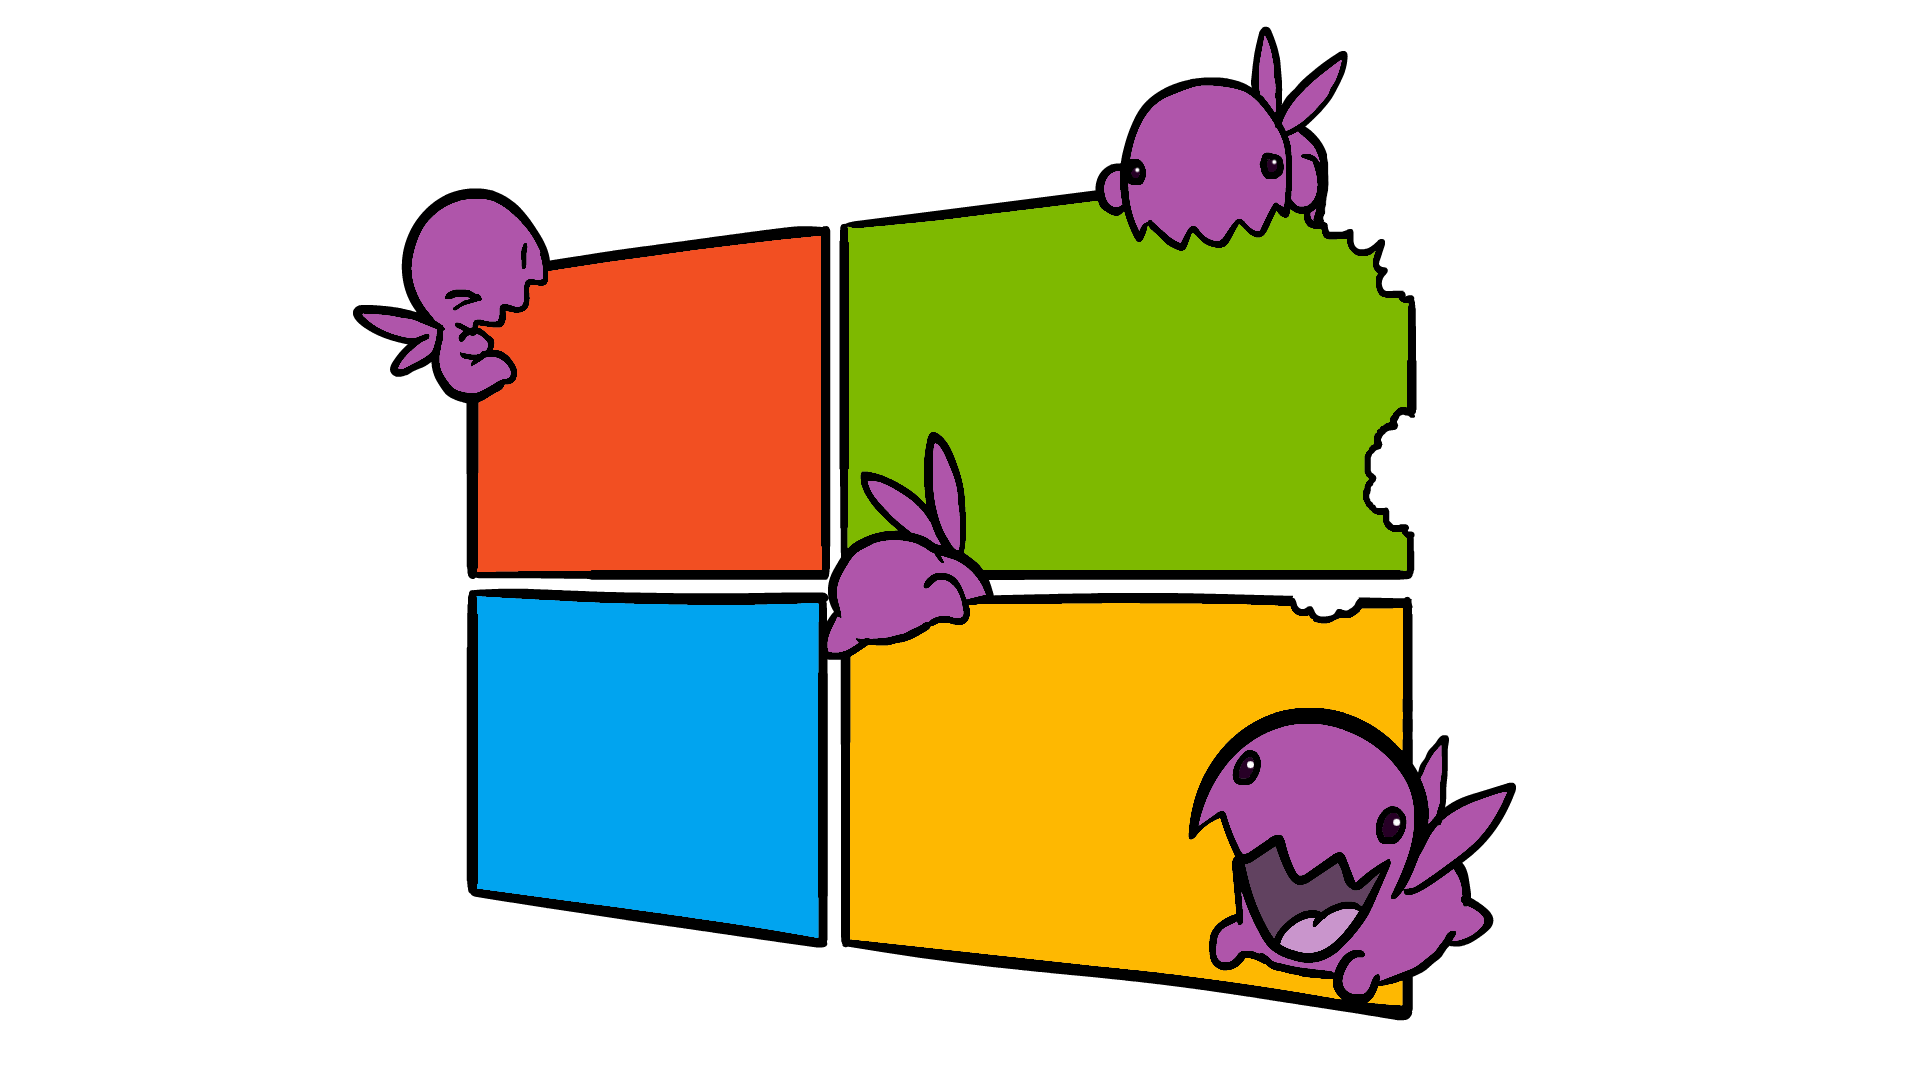 A Cute Zergling Wallpaper For Windows Users By Carbotanimations